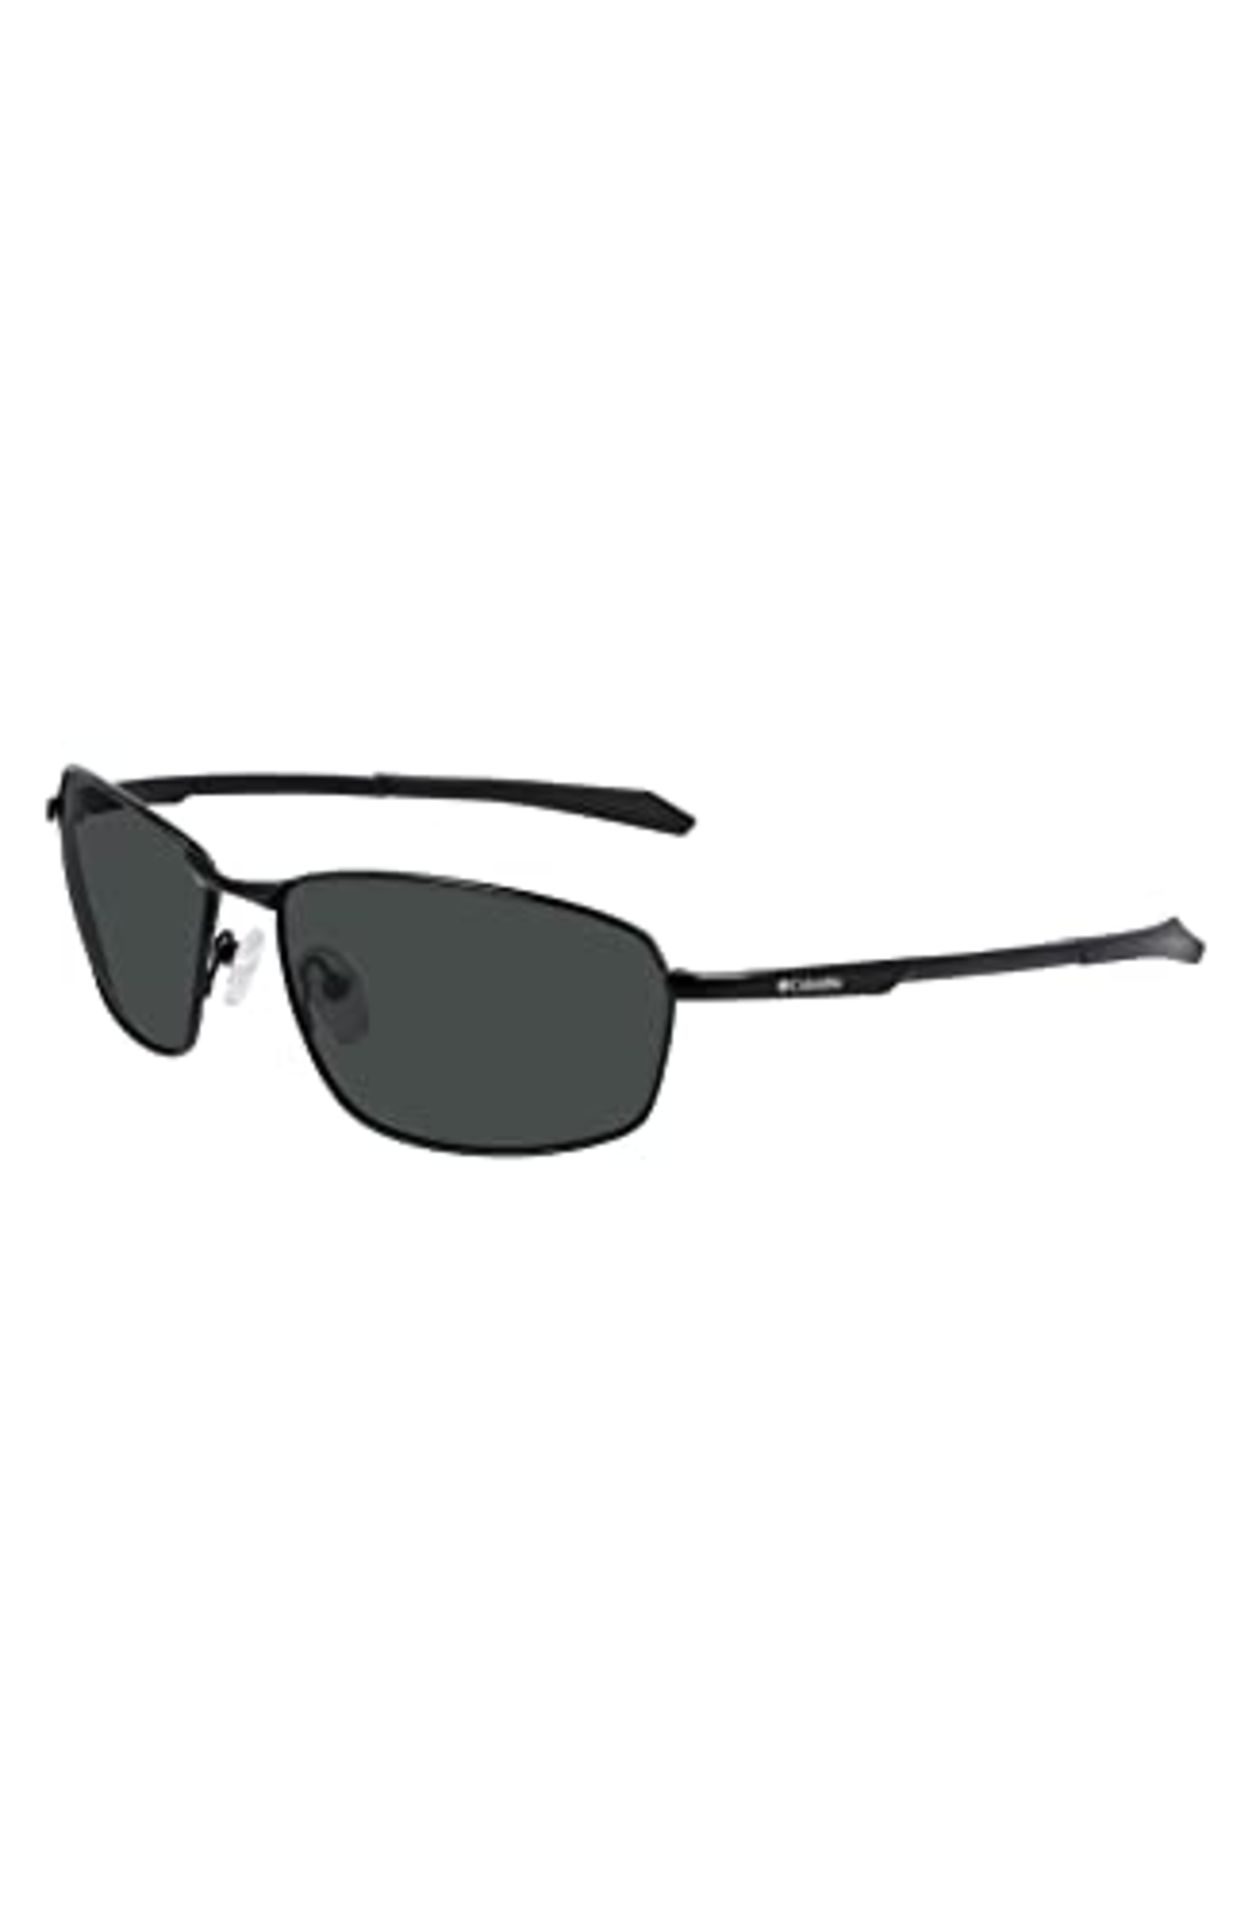 RRP £53.00 Columbia Men's Sunglasses C114SP FIR RIDGE - Shiny Black/Solid Green Lens with Solid G - Image 4 of 6